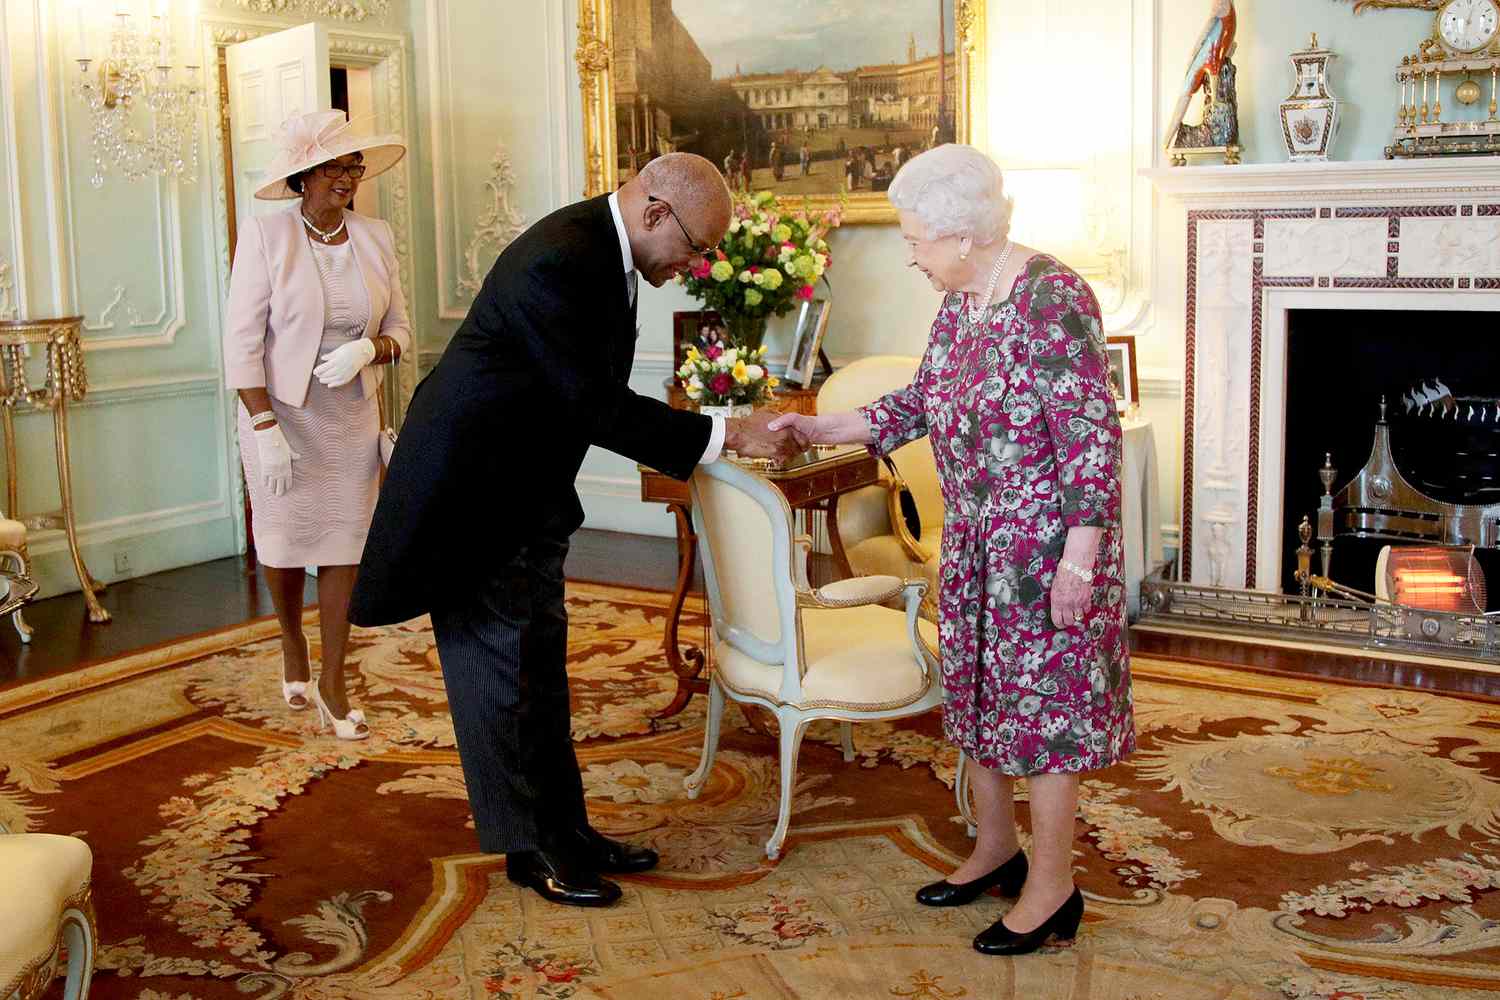 Audience with Queen Elizabeth II at Buckingham Palace